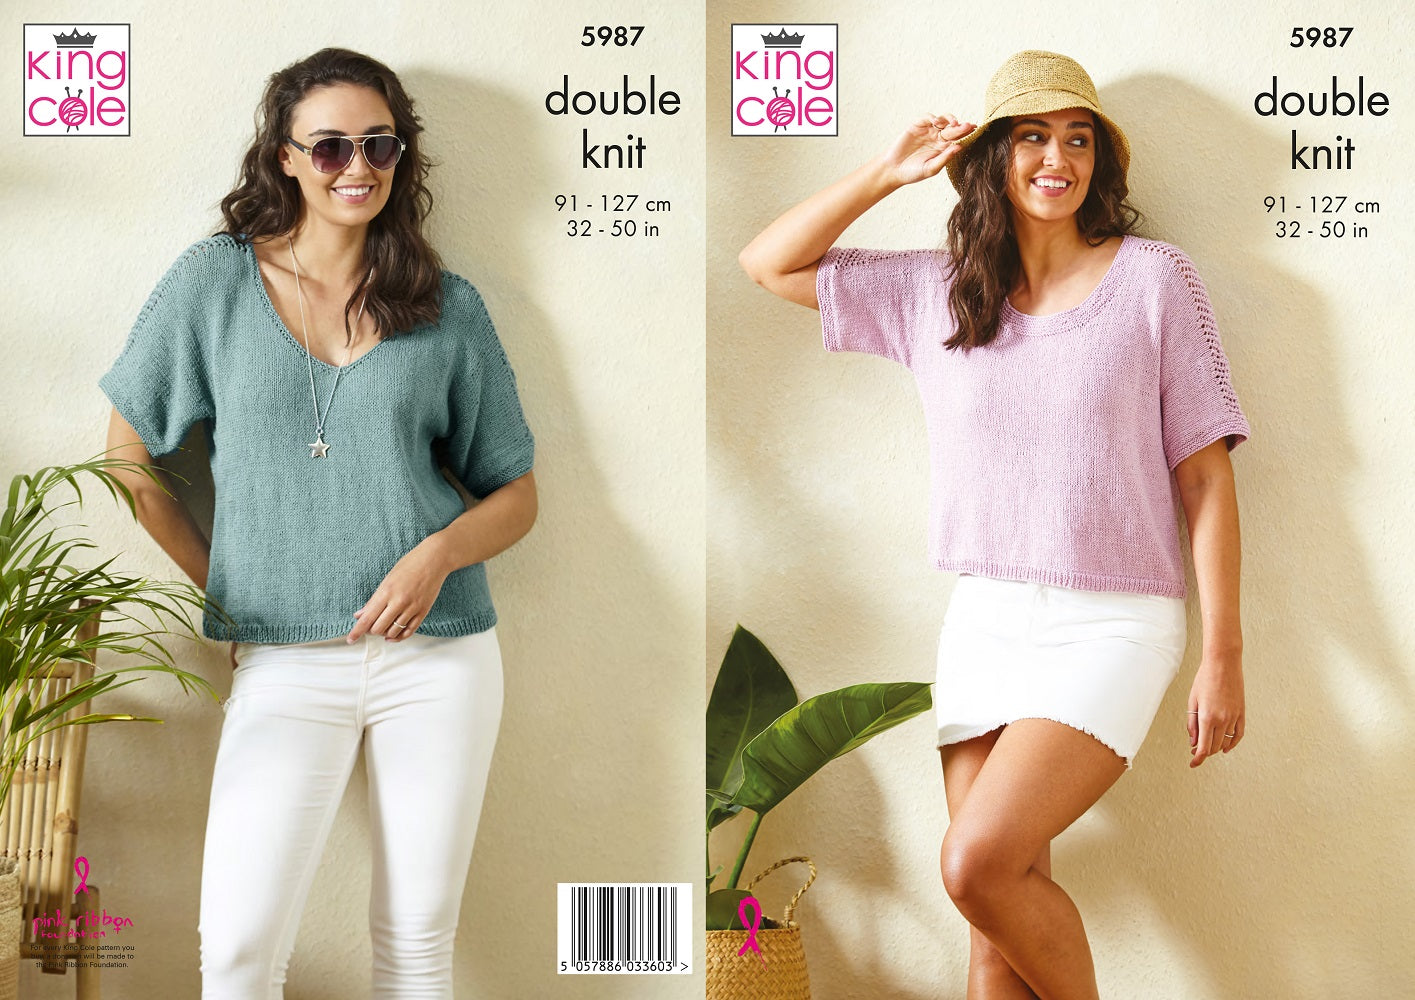 King Cole 5987 Adult DK Tops Knitting Pattern